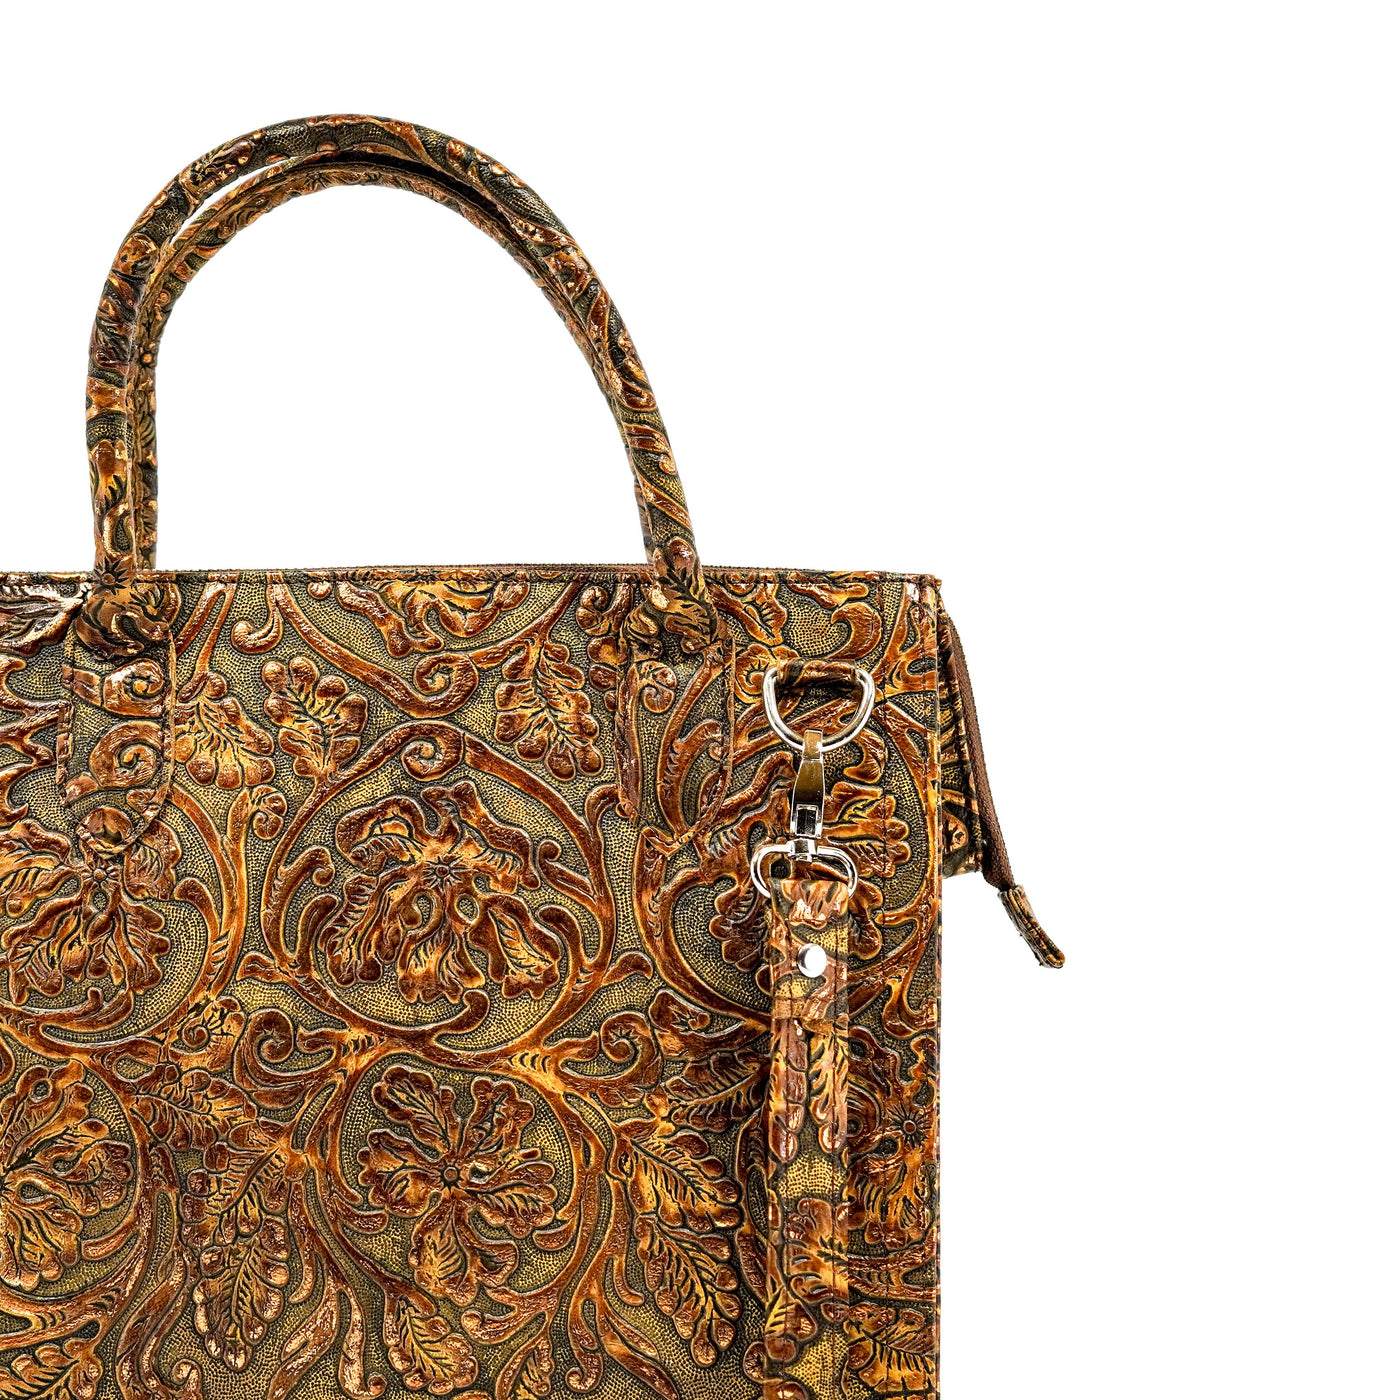 The Opry - All Embossed w/ Wyoming Tool-The Opry-Western-Cowhide-Bags-Handmade-Products-Gifts-Dancing Cactus Designs